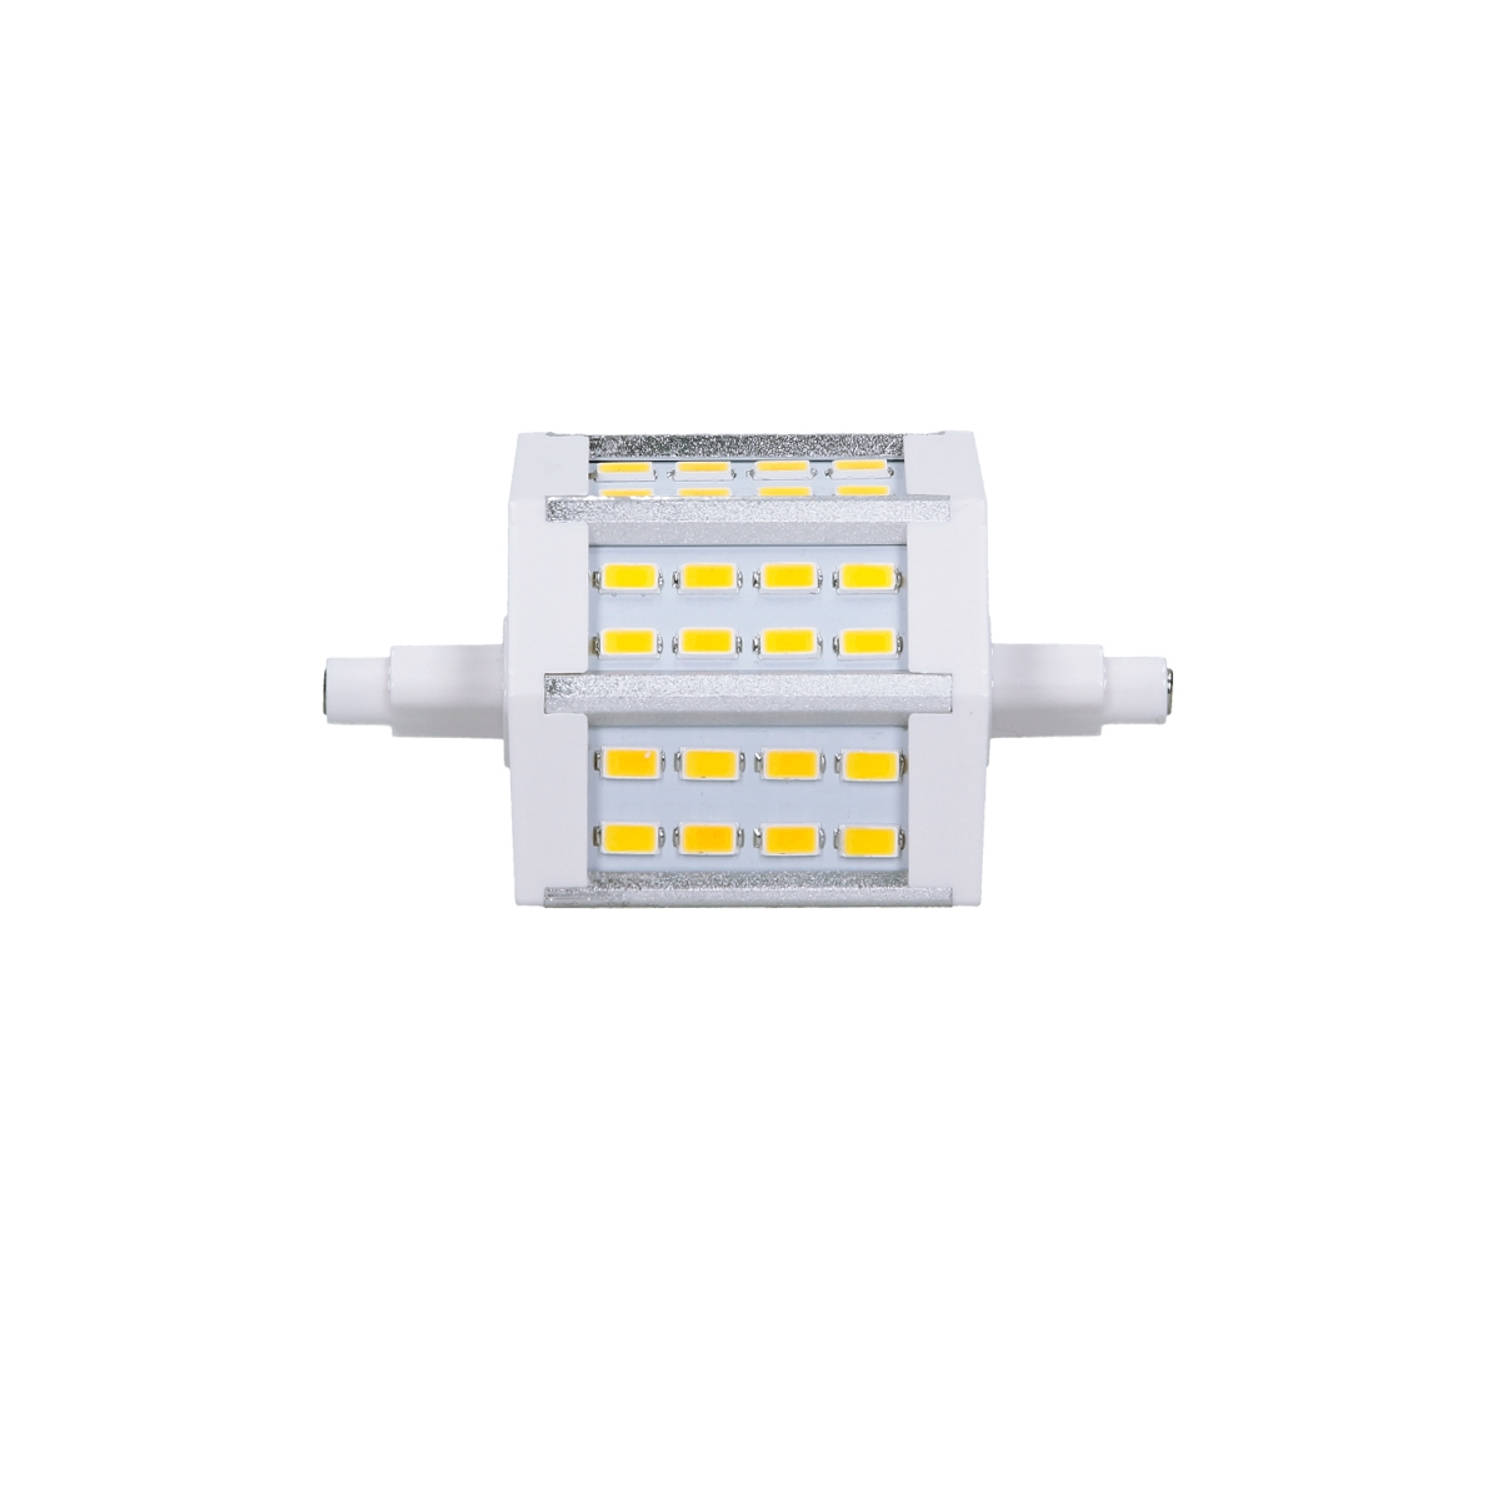 2 xLED lamp R7S 5W warm wit 78mm SMD5730 dimbaar